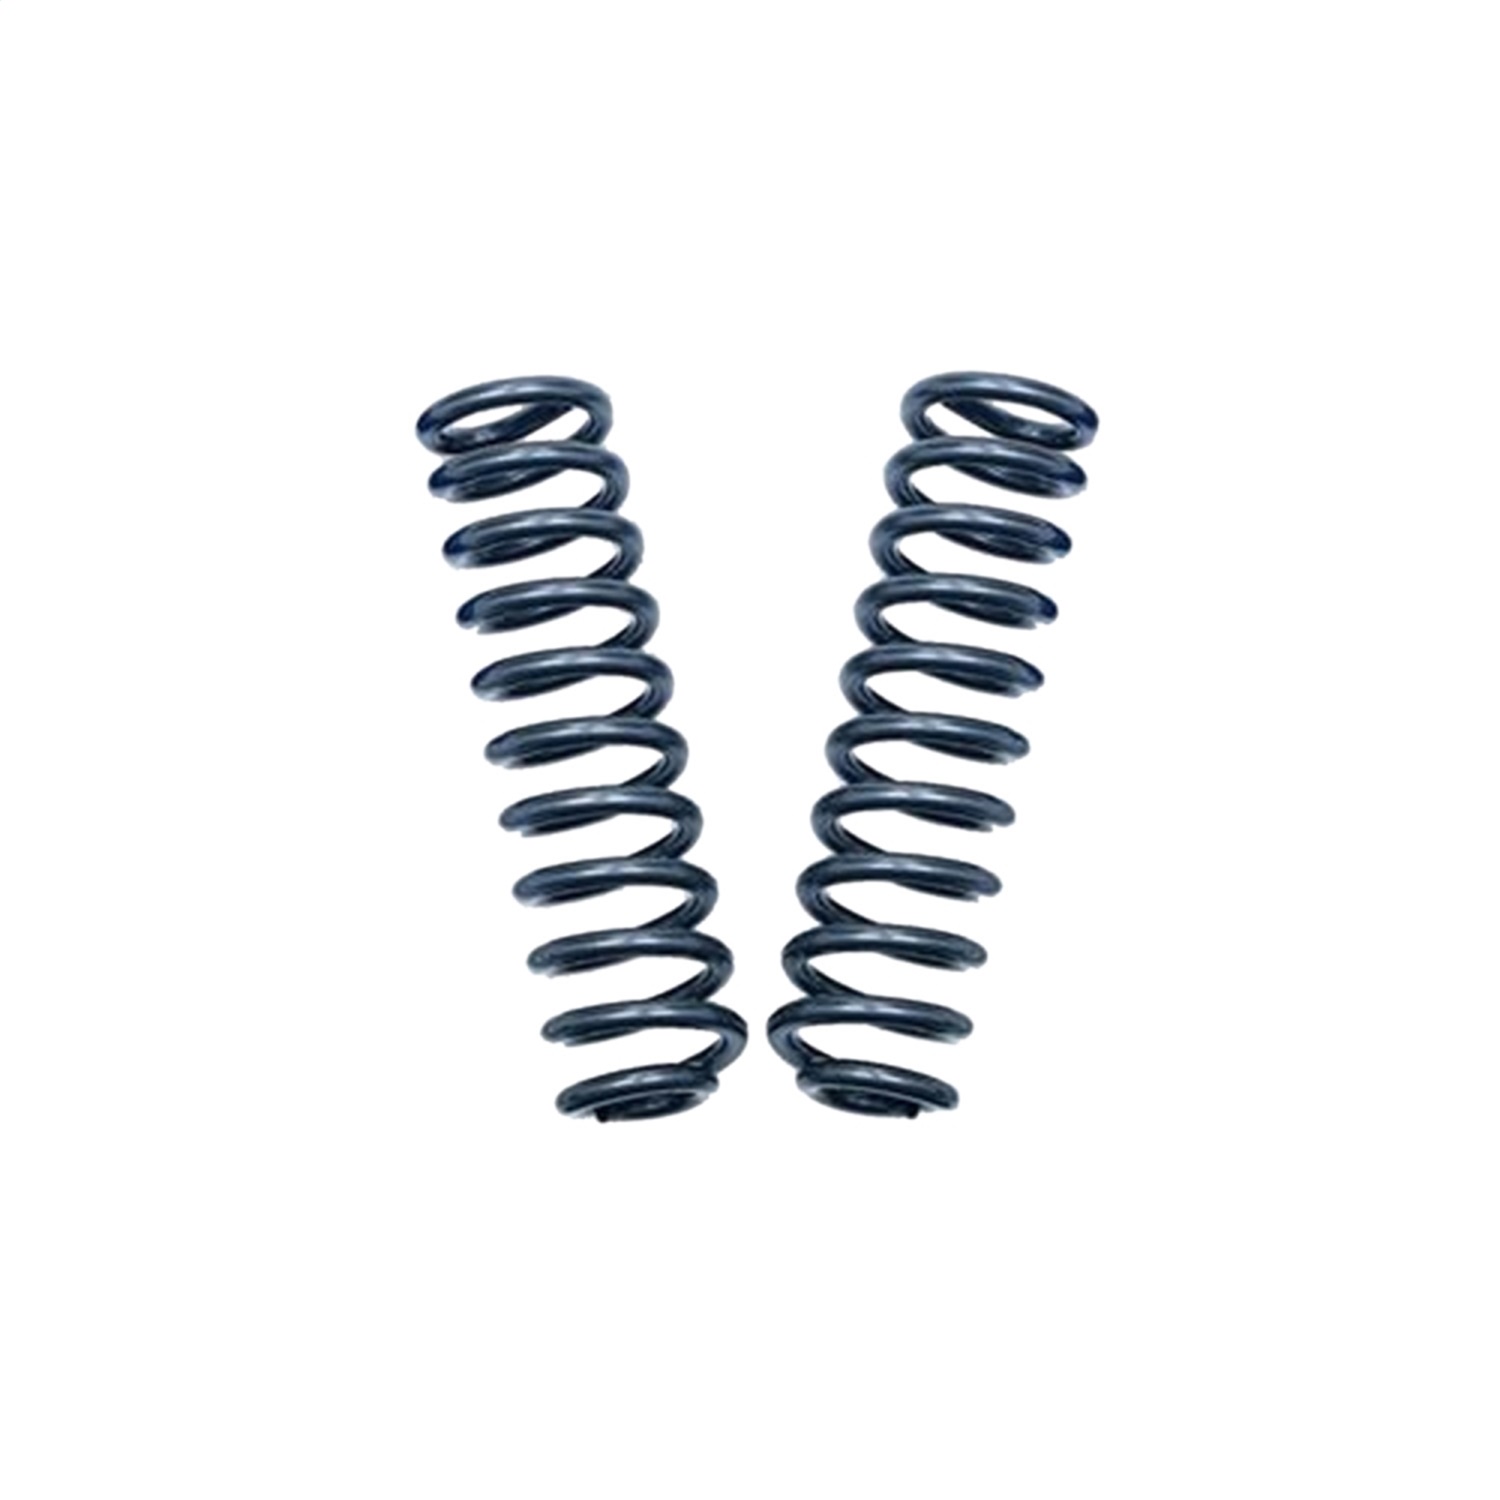 55207 Pro Comp Suspension Coil Spring 2.5 to 4 Inch Lift